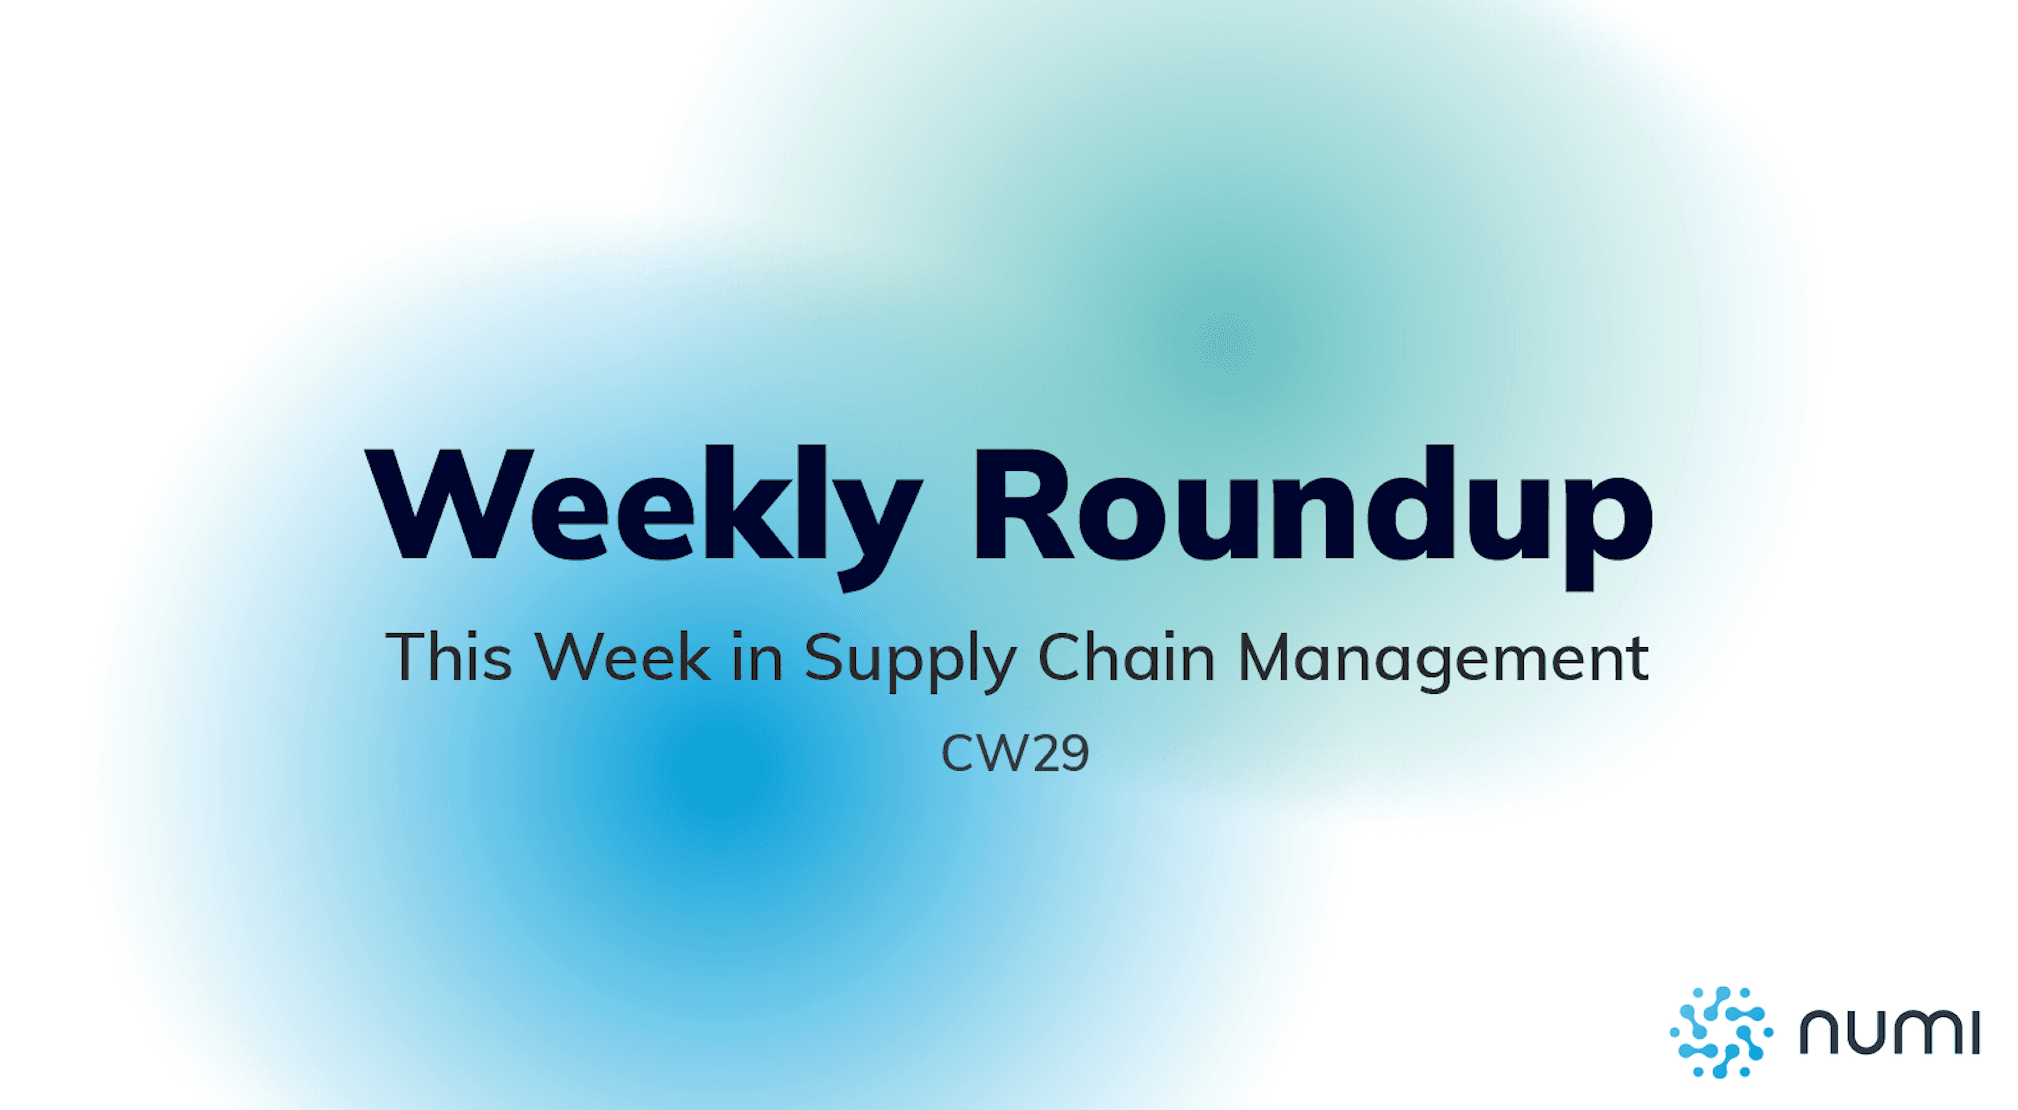 Weekly Roundup - Aerospace Procurement, Global IT Outage and Aldi Süd Pick-up Machines